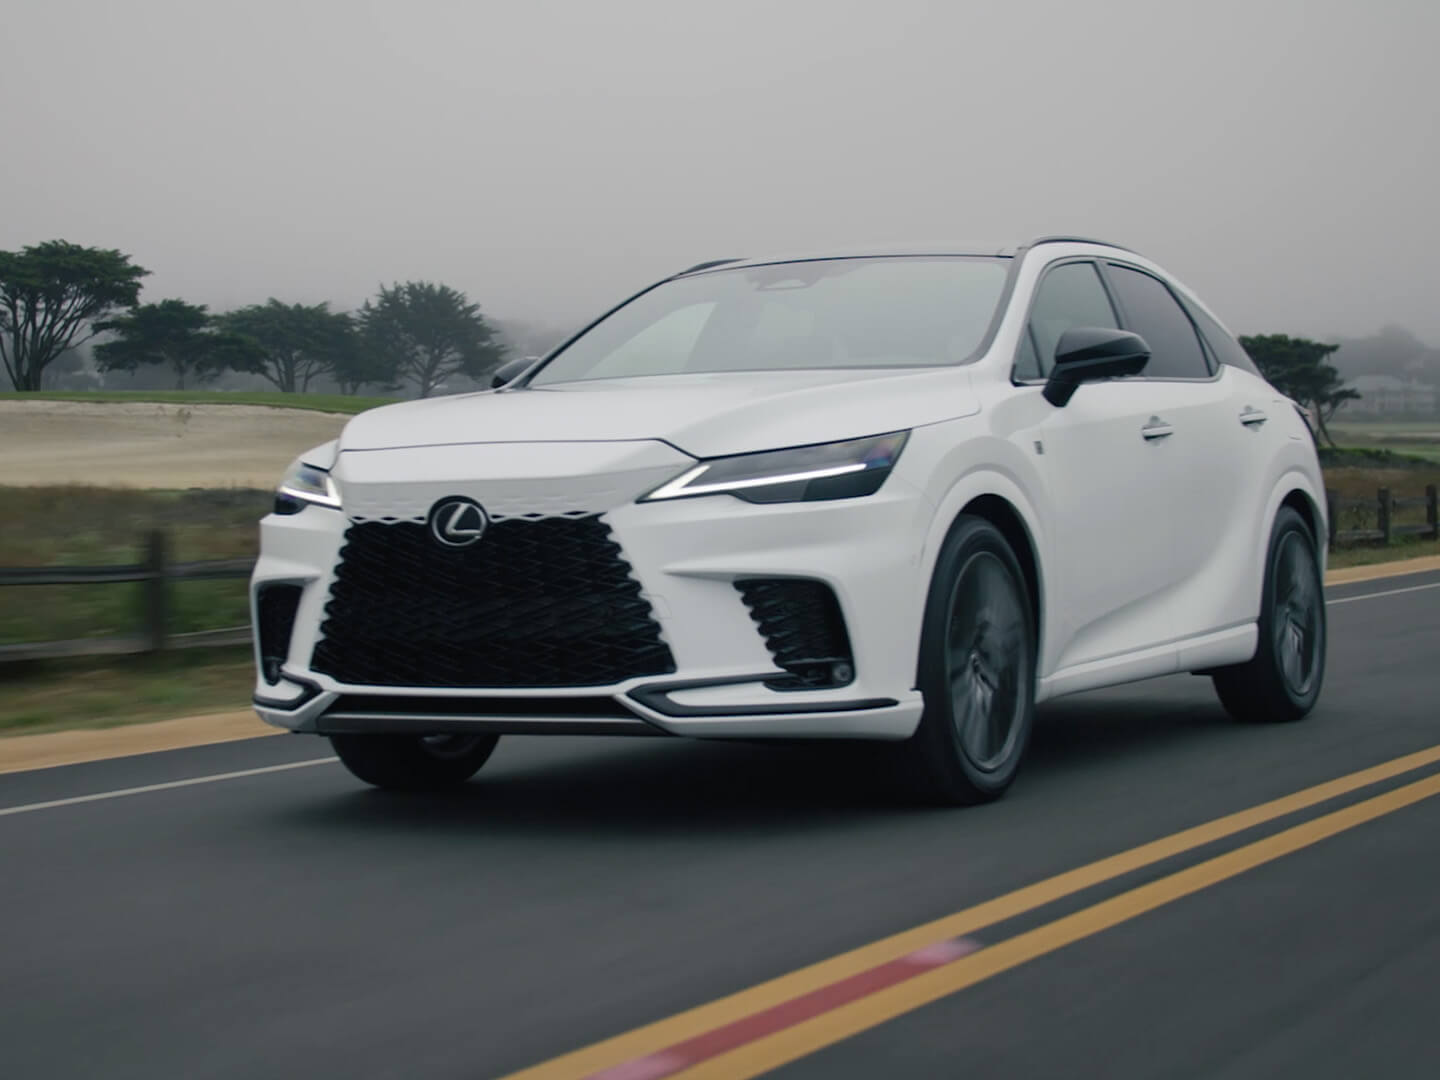 The Lexus RZ driving on a road